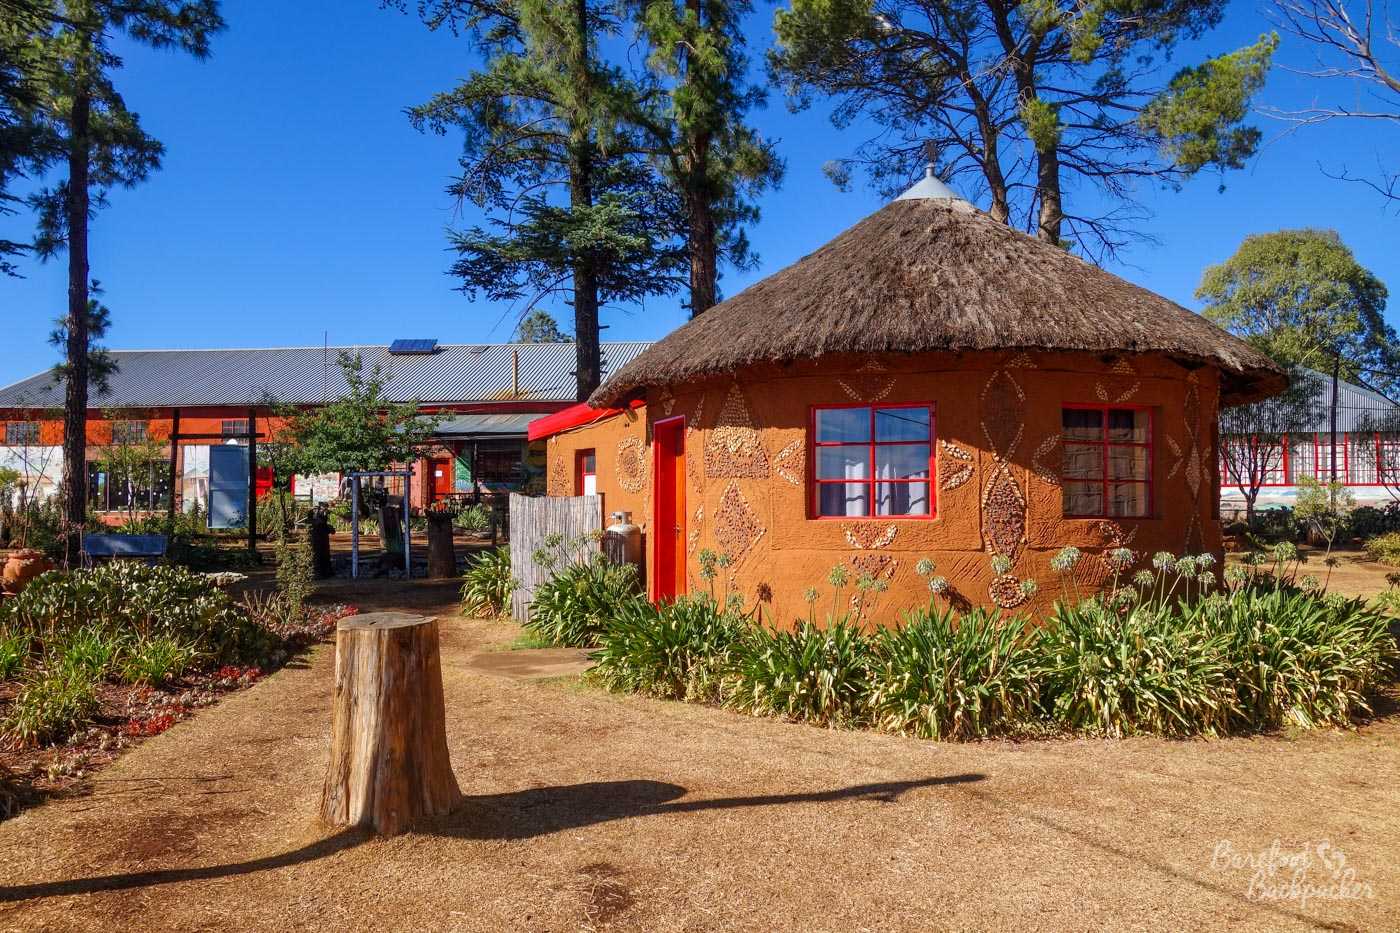 An example of the huts at Malealea Lodge that you can sleep in. I think this is the Basotho Hut, like the one I was in.